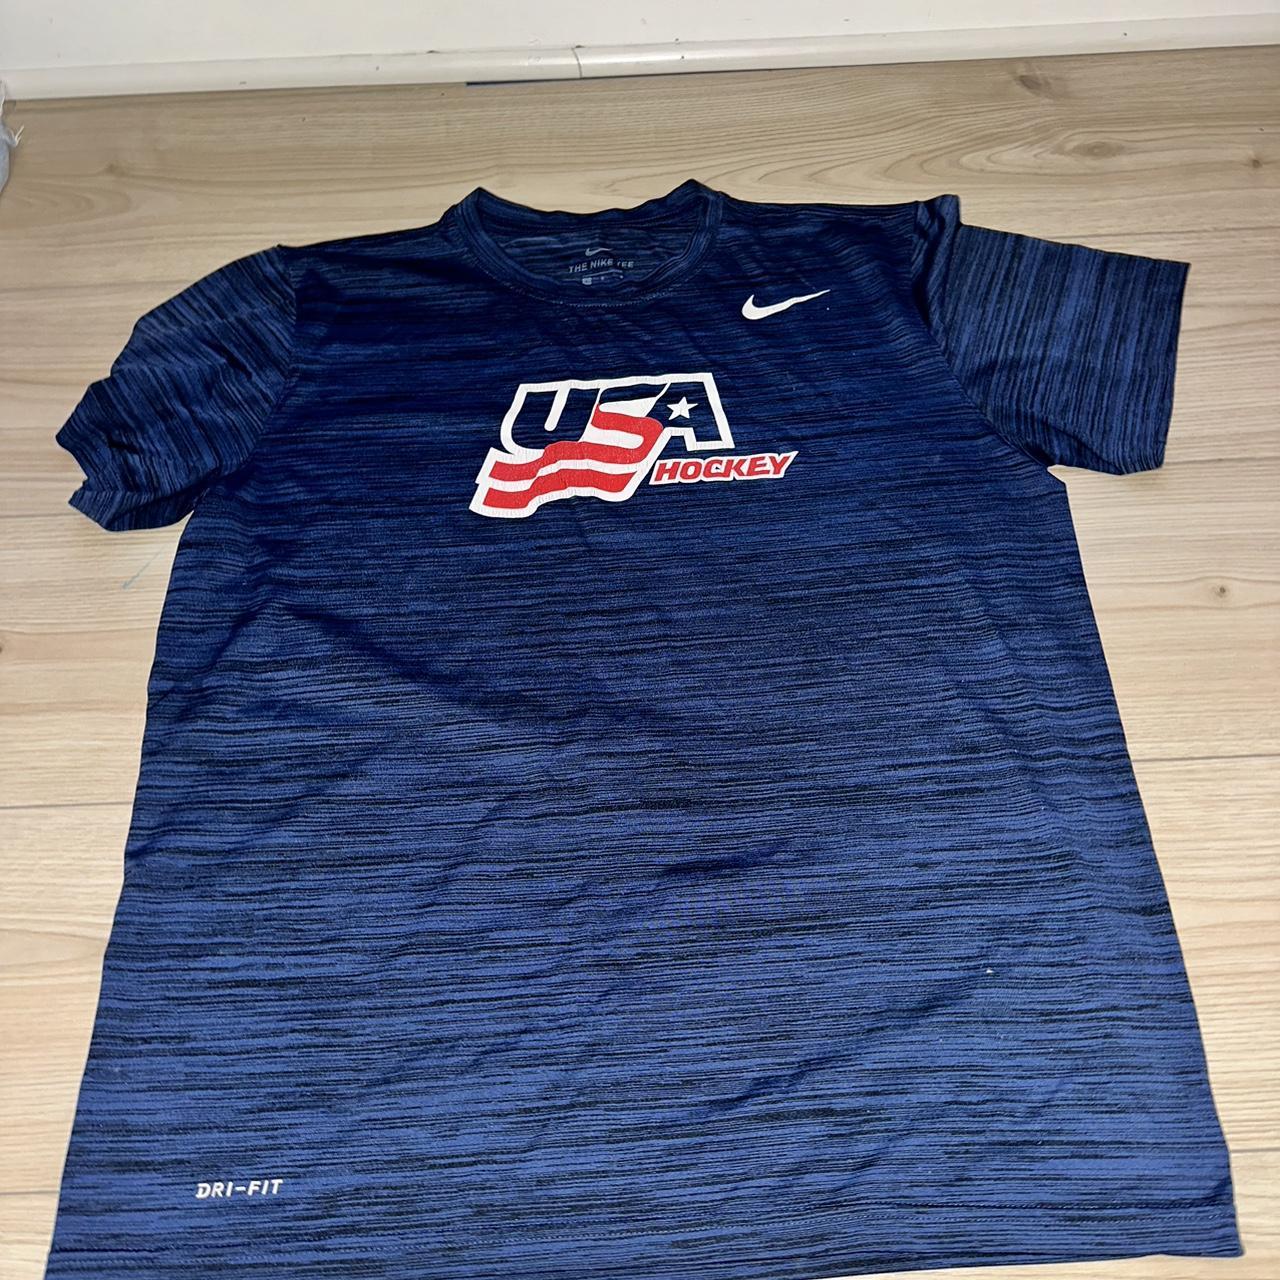 New Nike Women's The Nike Tee Size Extra Large - Depop